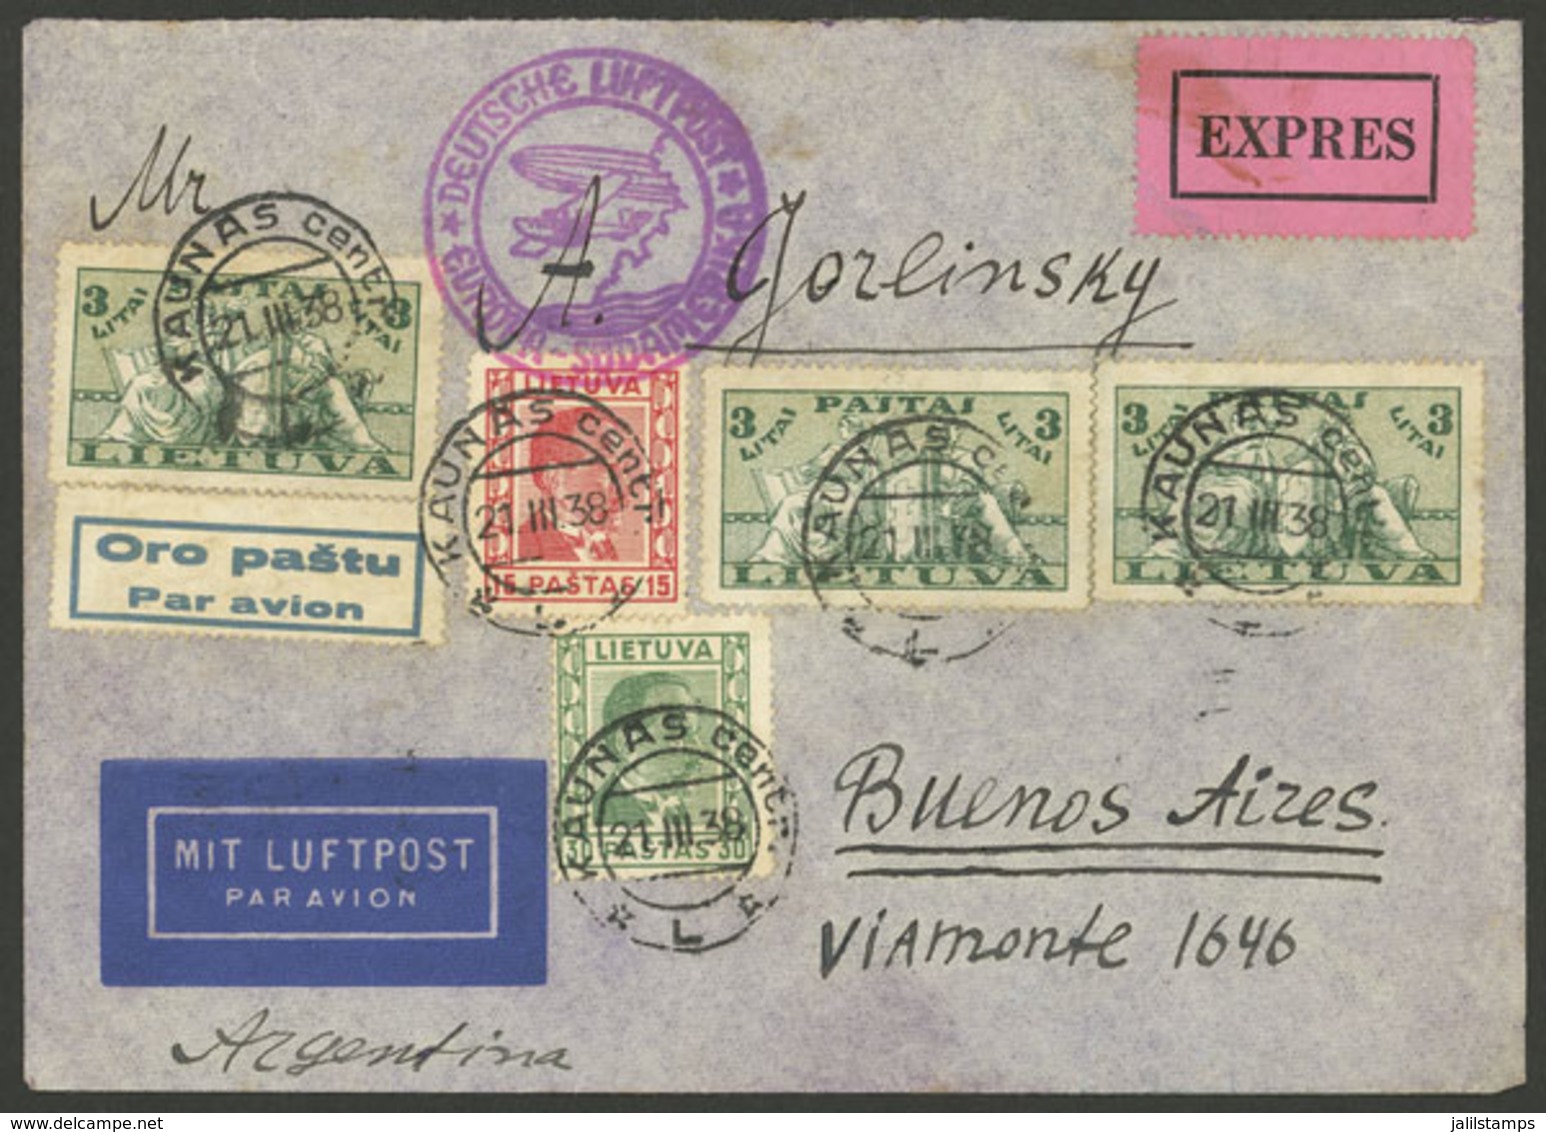 LITHUANIA: 21/MAR/1938 Kaunas - Argentina, Express Airmail Cover Sent By German DLH Franked With 9.45L., On Back Transit - Litauen